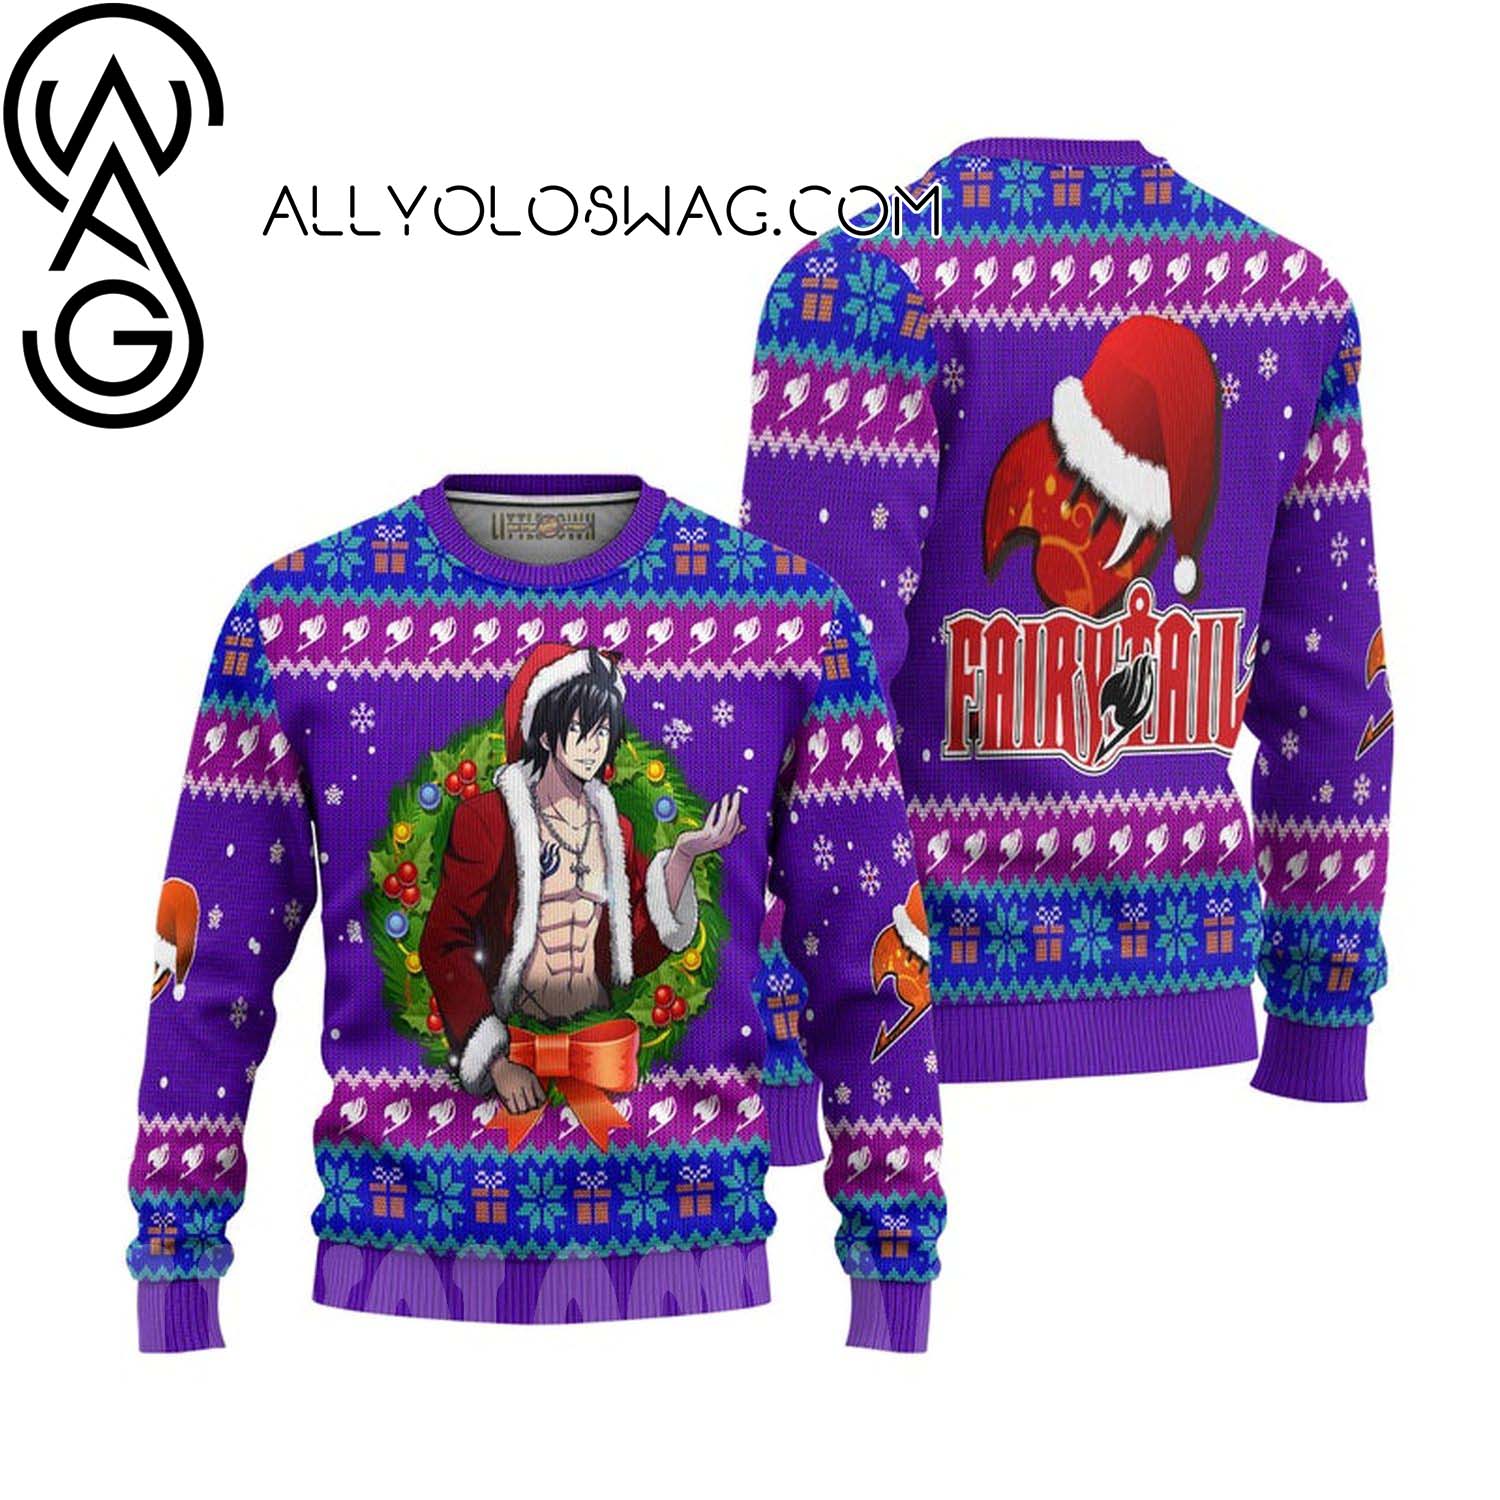 Gray Fullbuster Fairy Tail Anime Ugly Christmas Sweater